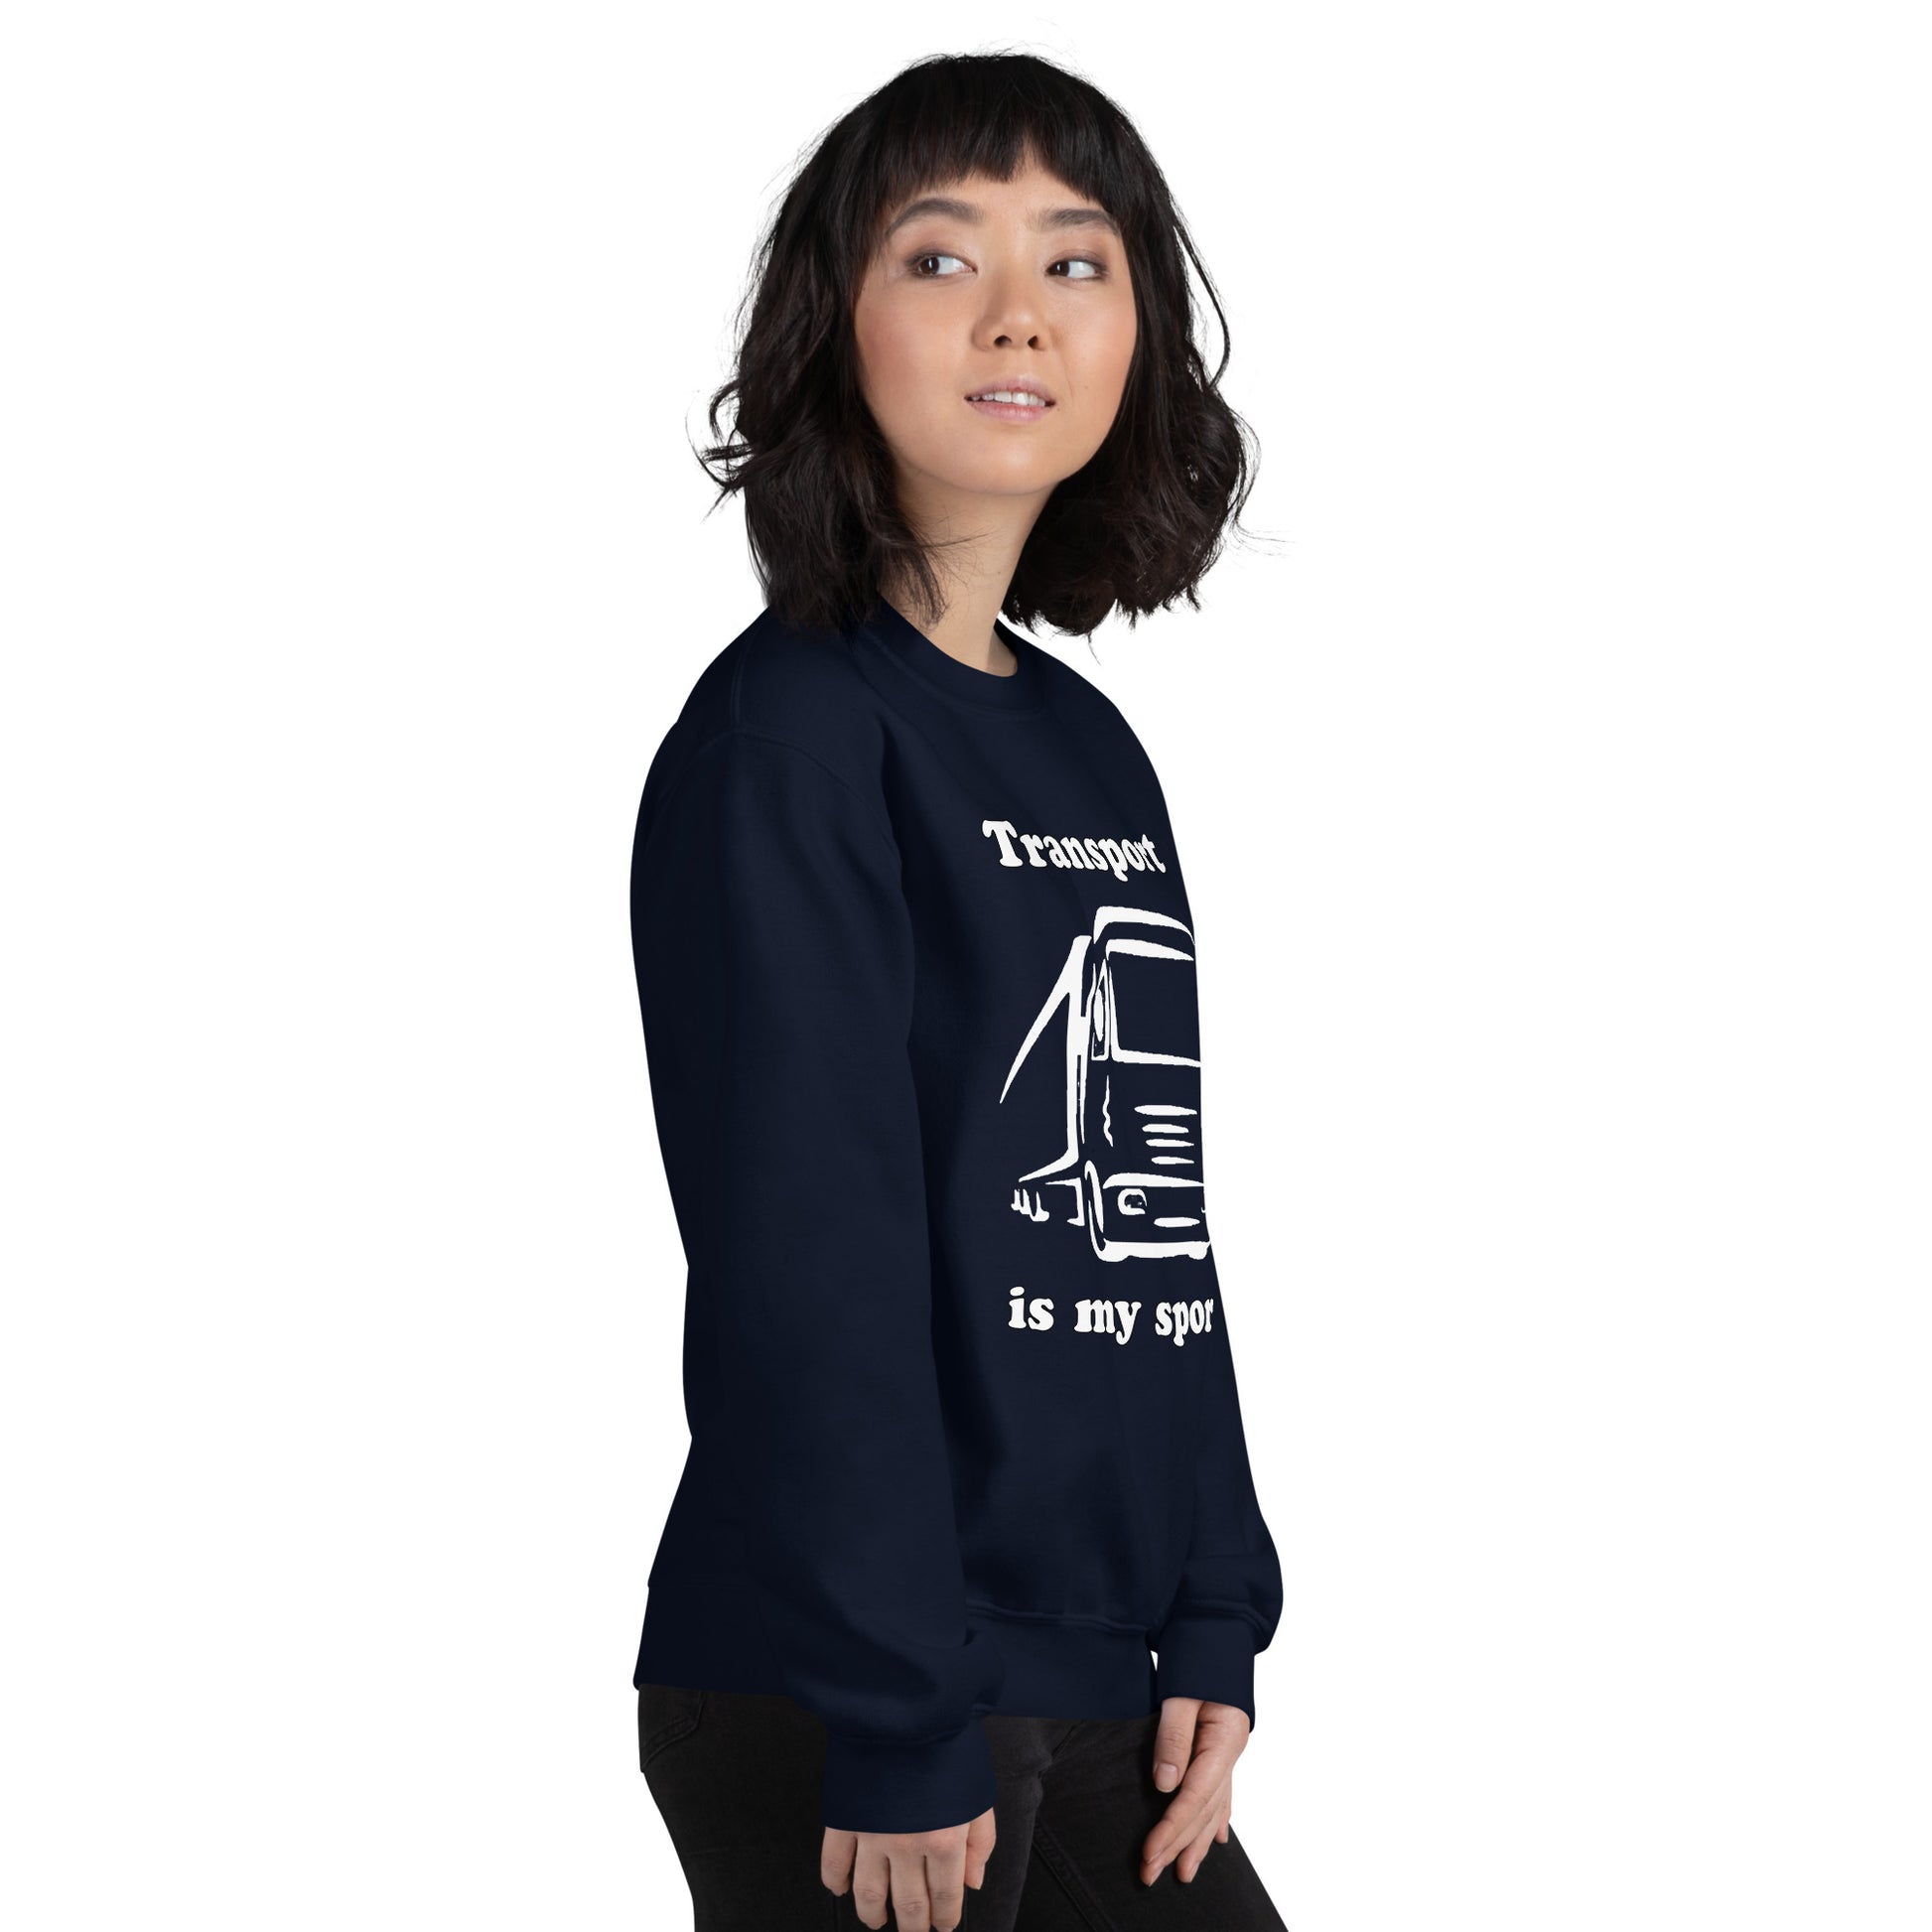 Woman with navy blue sweatshirt with picture of truck and text "Transport is my sport"